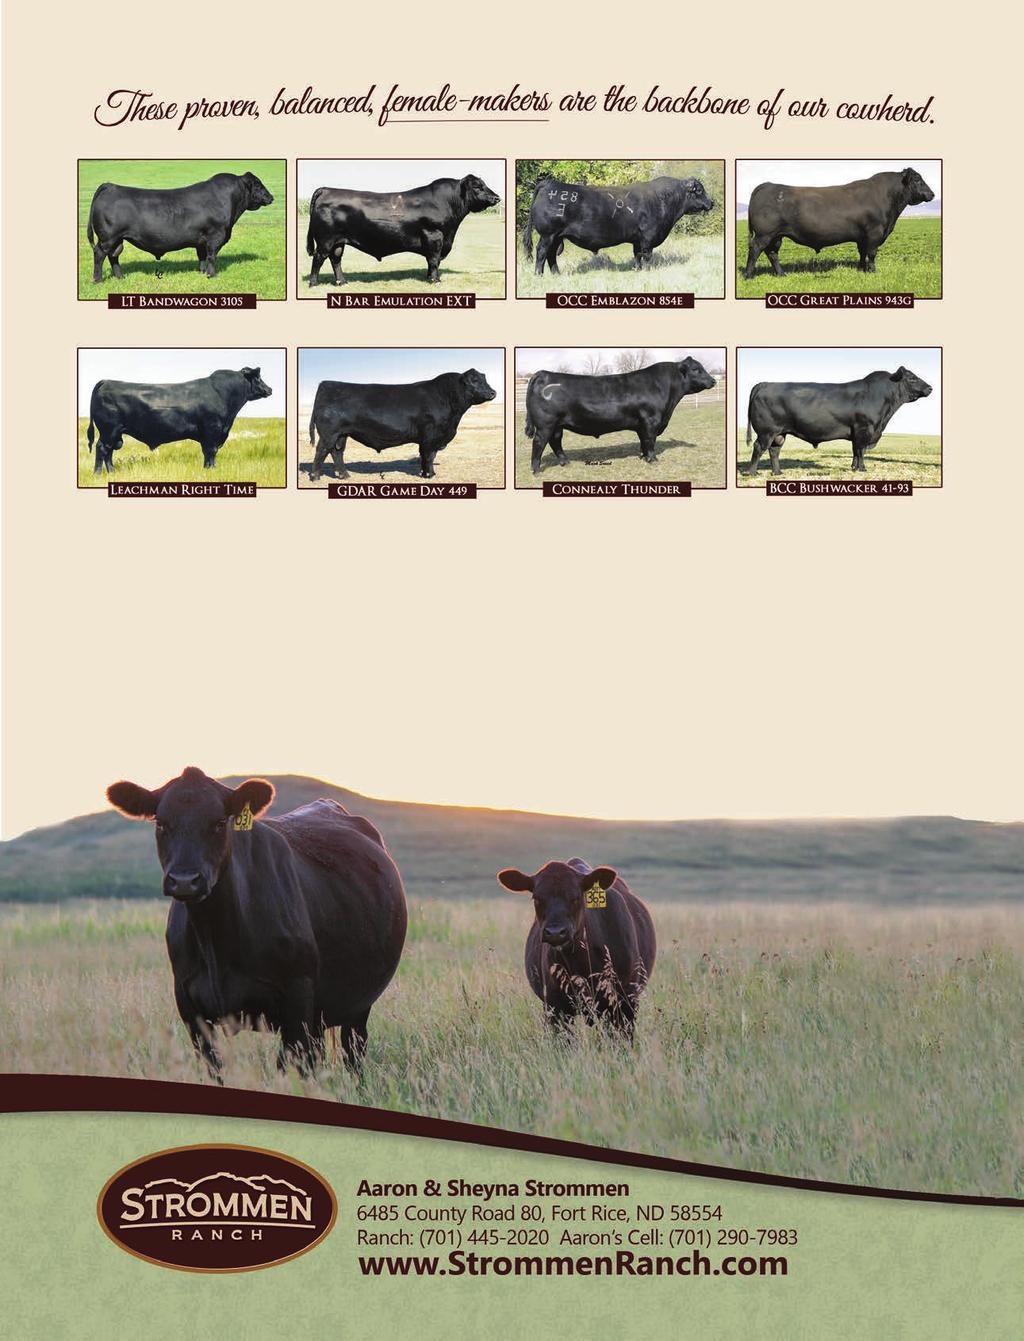 THESE PROVEN, BALANCED-TRAIT, FEMALE-MAKERS ARE THE BACKBONE OF OUR COWHERD. Our herd dates back to 1942 when Aaron s grandfather, Ernest Strommen, bought his first registered Angus female.